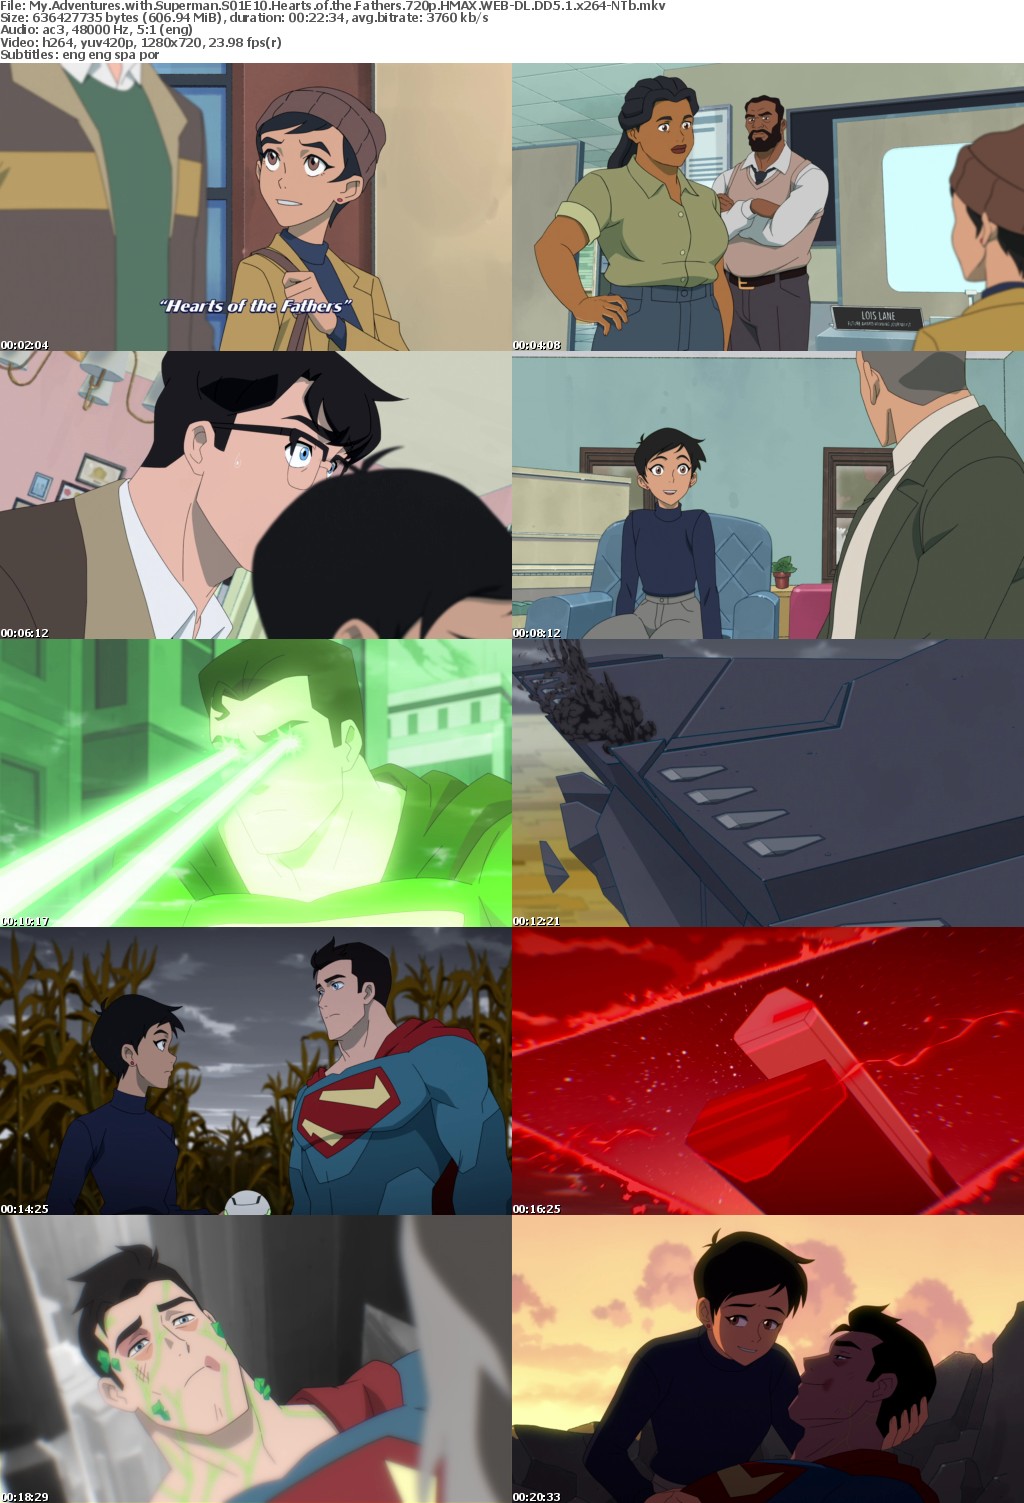 My Adventures with Superman S01E10 Hearts of the Fathers 720p HMAX WEB-DL DD5 1 x264-NTb